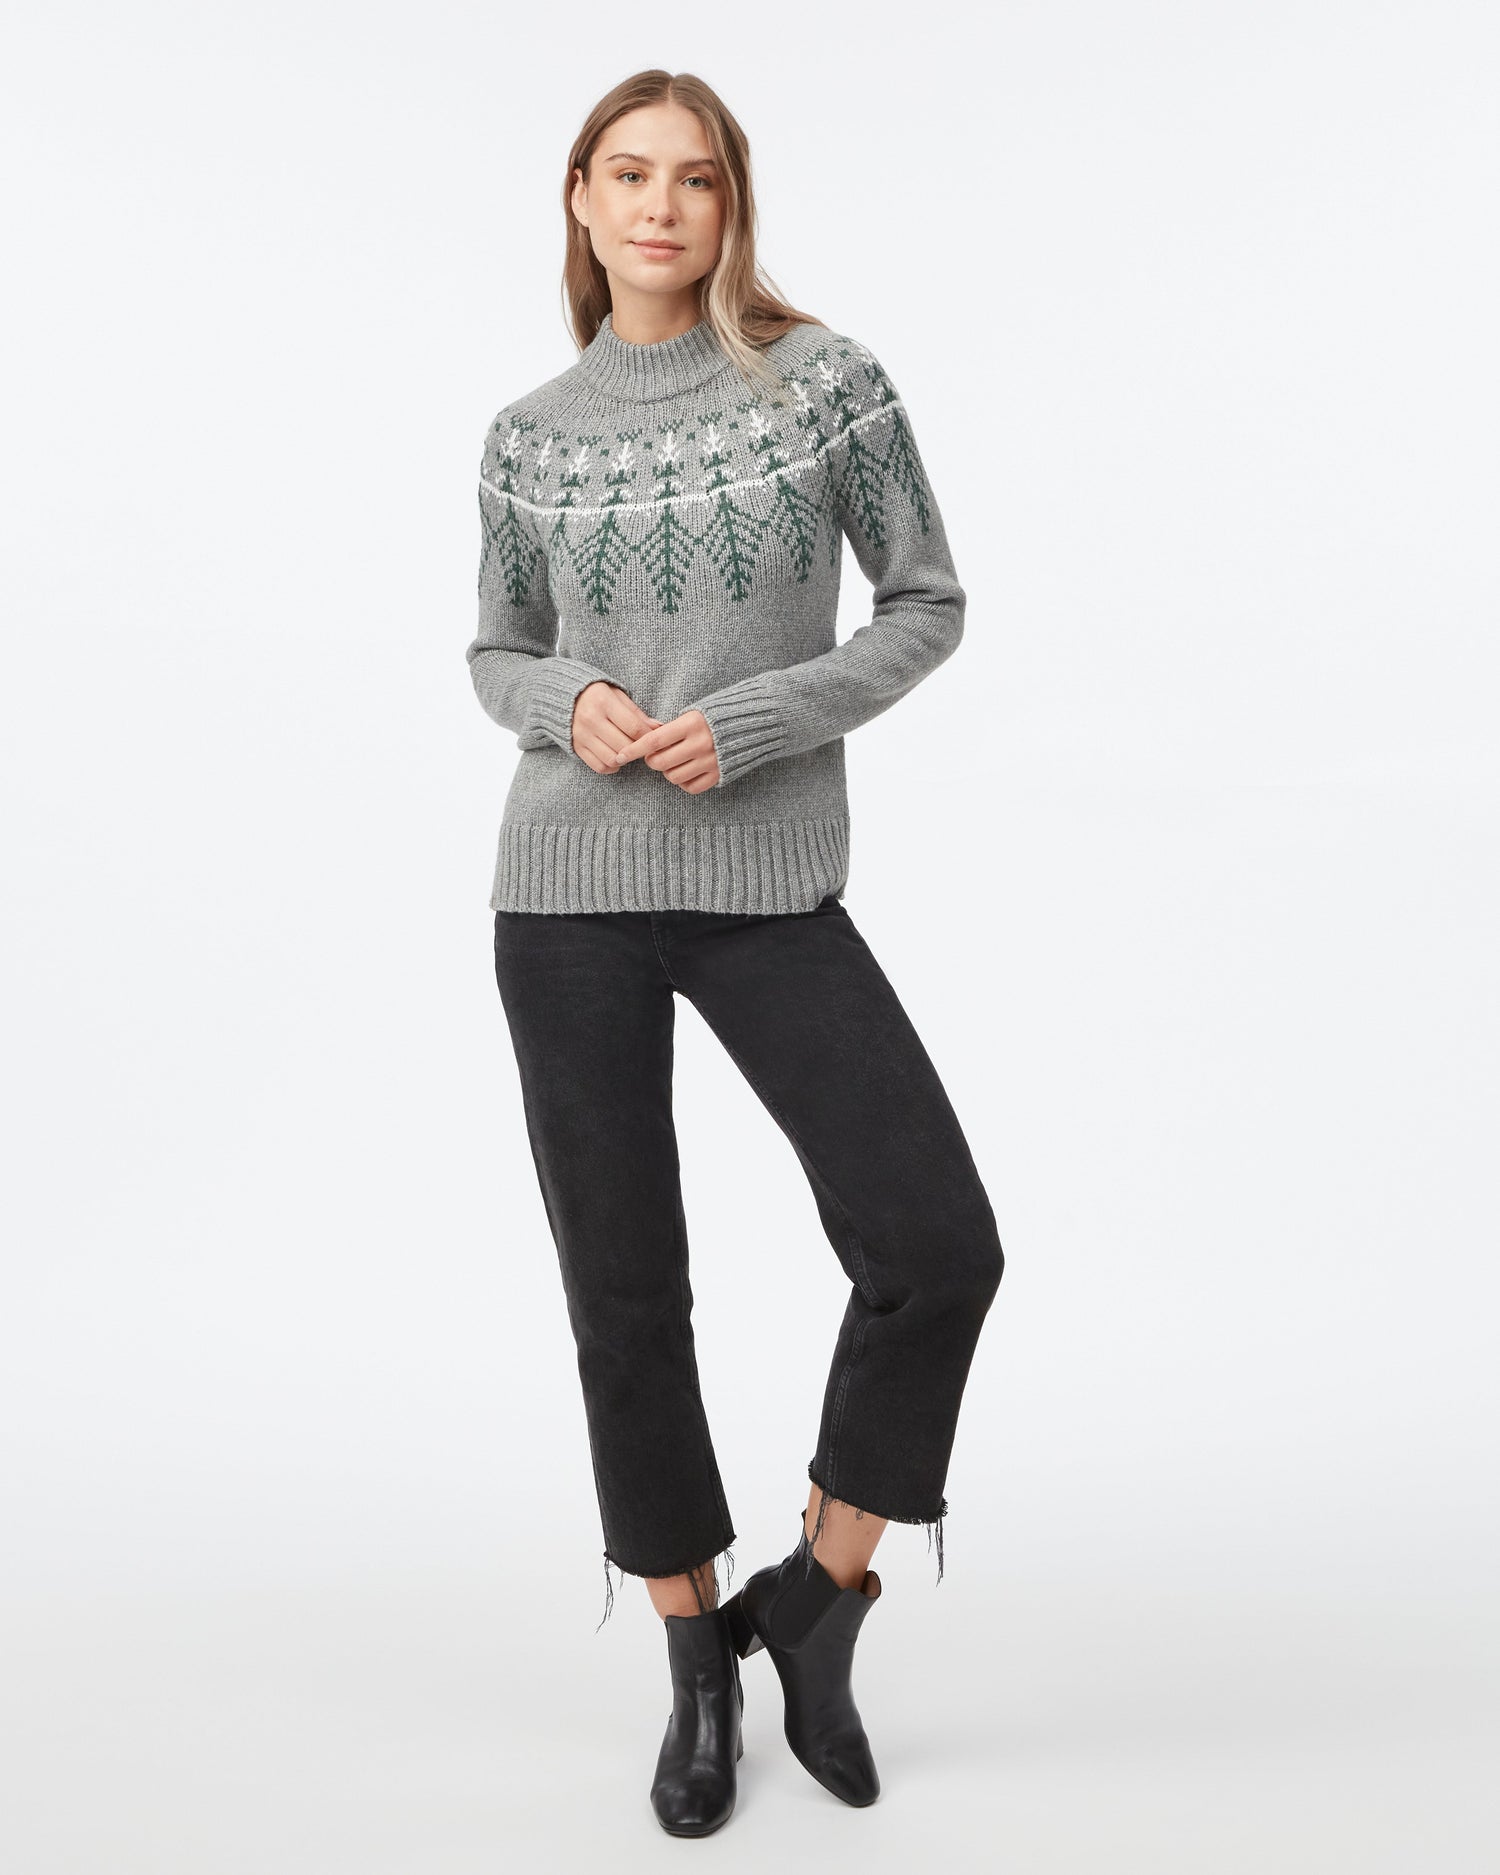 Tentree W's Highline Wool Intarsia Sweater - Made From Recycled Polyester & Organic Cotton Grey Heather/Hunter Green Shirt